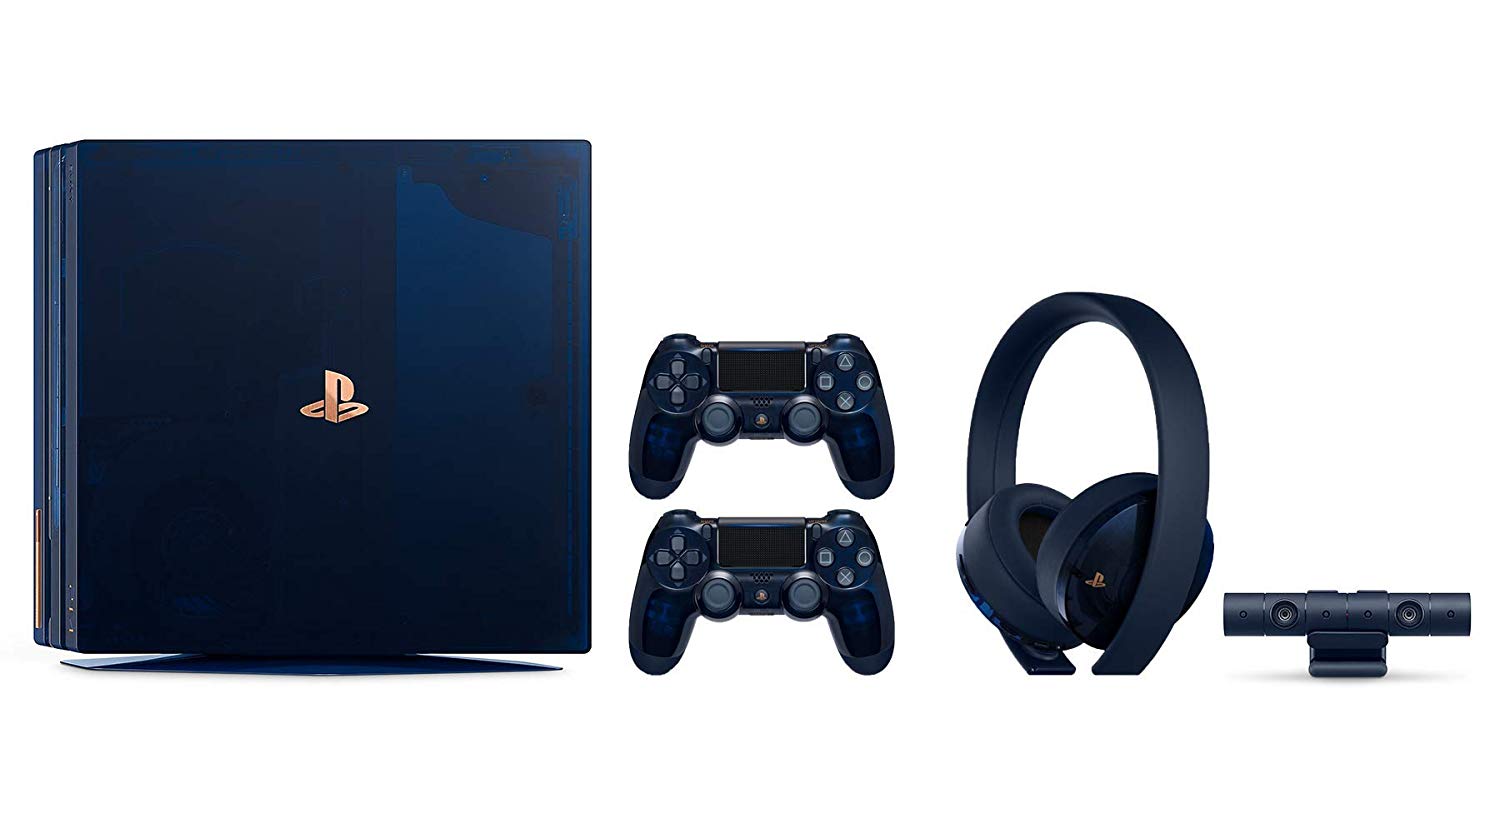 Playstation 4 PRO 500 Million Limited Edition Complete Collection:  Translucent Blue 2TB Playstation 4 Pro Bundle (Limited to 50,000 Units  Worldwide) with Extra Wireless Controller and Headset - Walmart.com